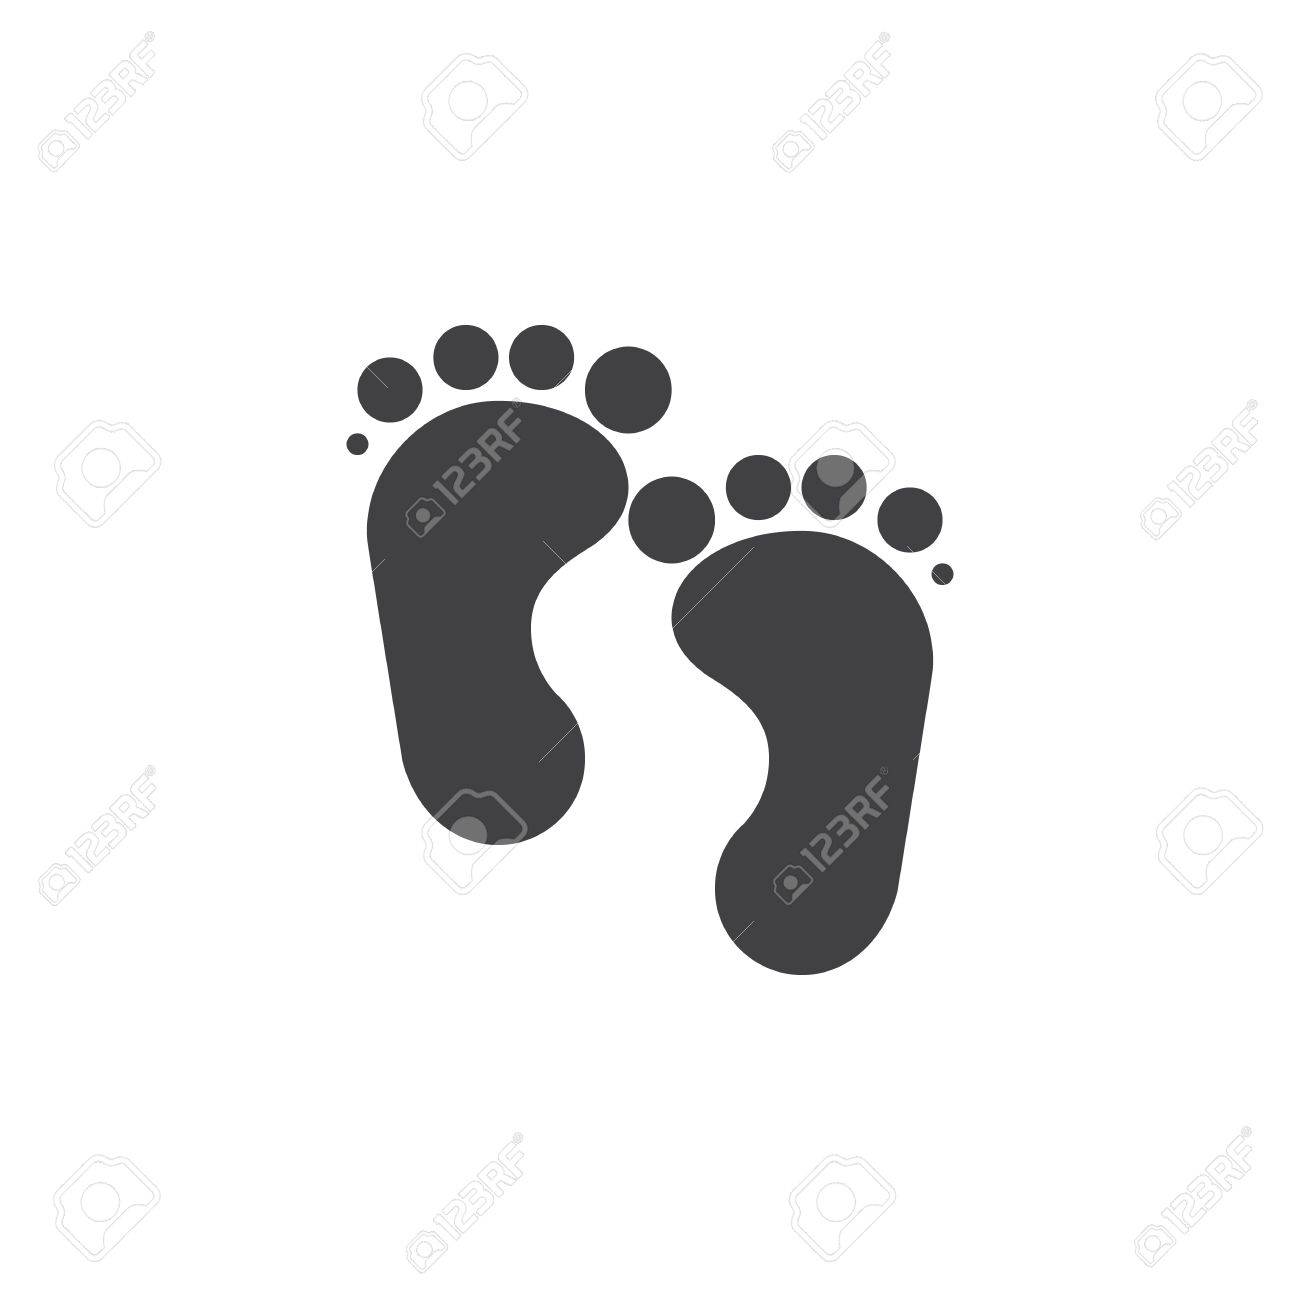 Sole of the foot icon vectors - Search Clip Art, Illustration 